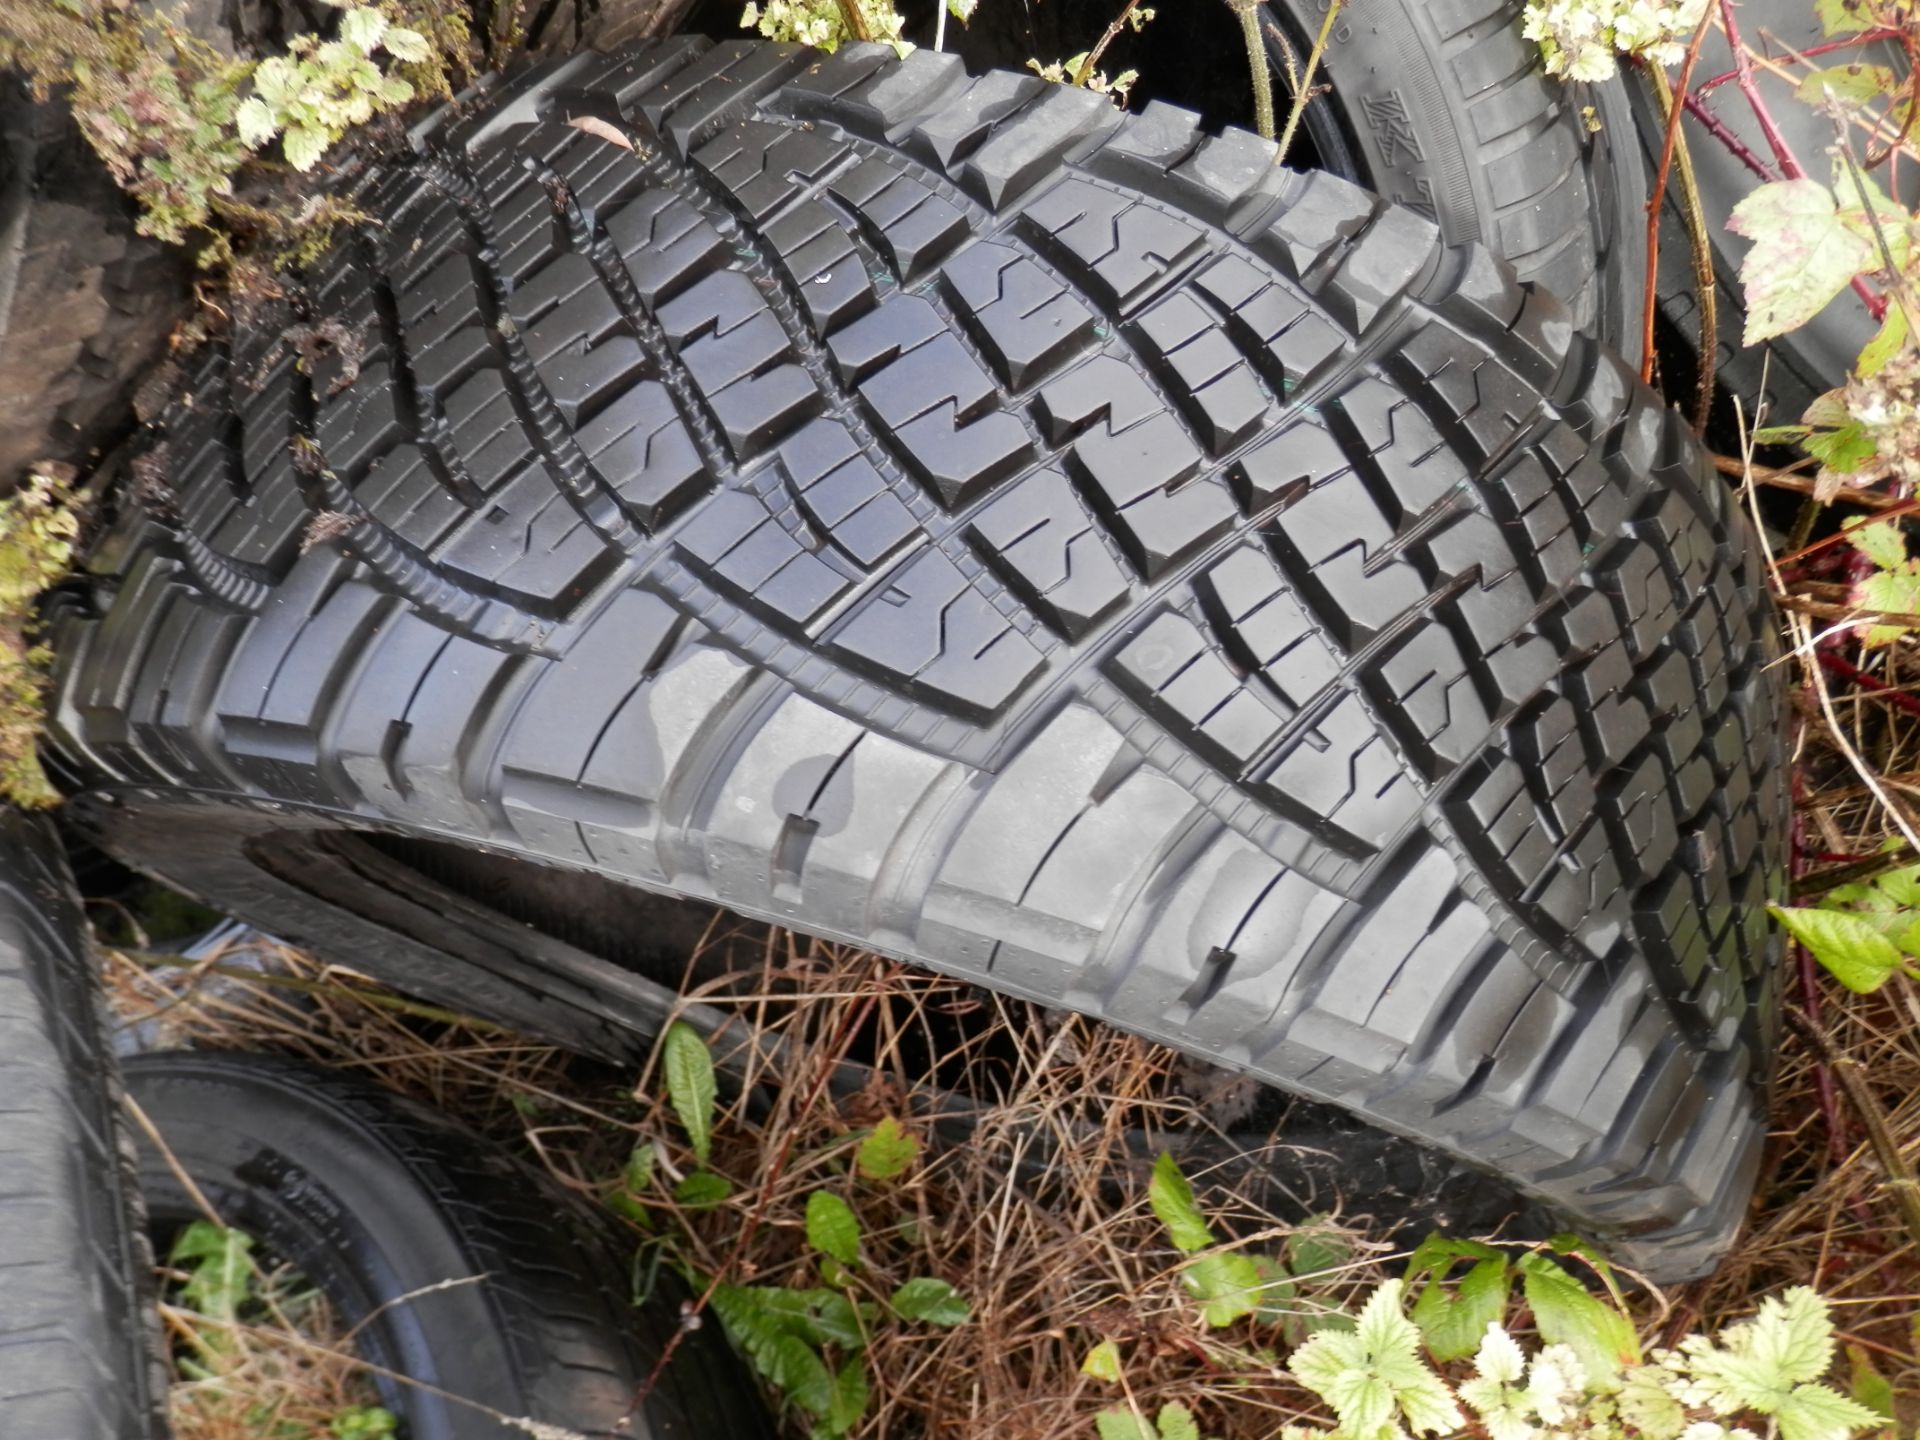 3 CAR GARAGES FULL OF USED, PART WORN TYRES. ASSORTED FROM CAR TO LORRY TYRES. POSSIBLY 800+ £10 !! - Image 5 of 8